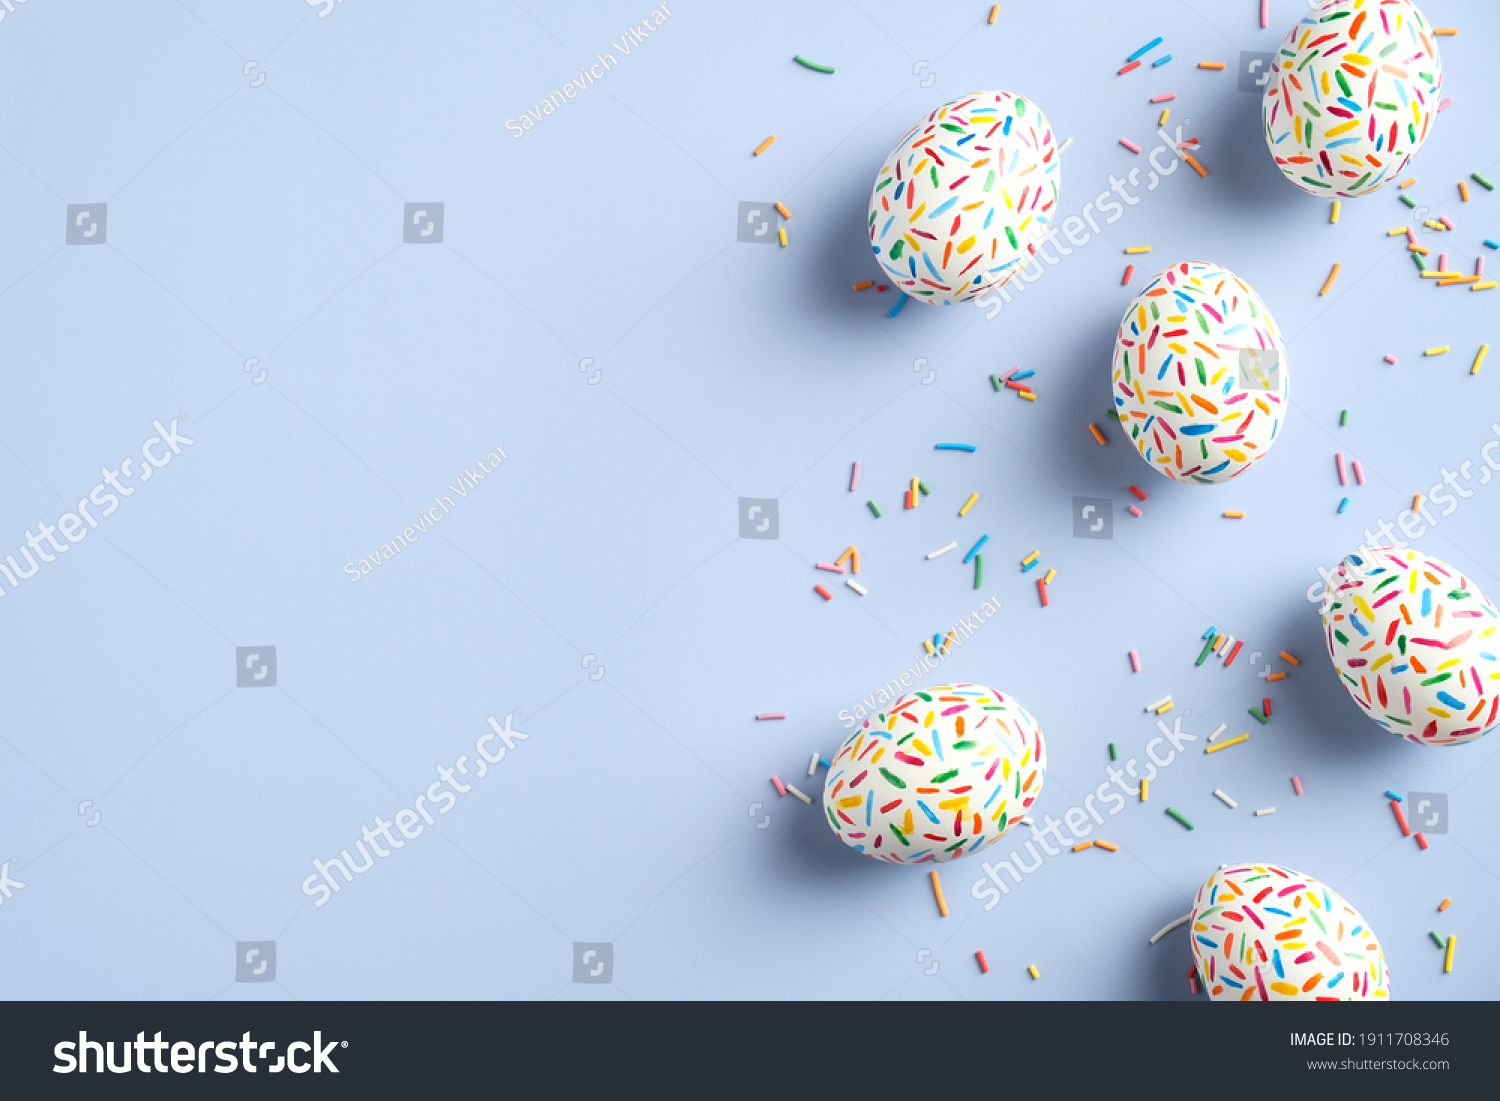 Creative layout with colorful Easter eggs on blue background. Happy Easter banner mockup. Minimal style. Flat lay, top view. #1911708346